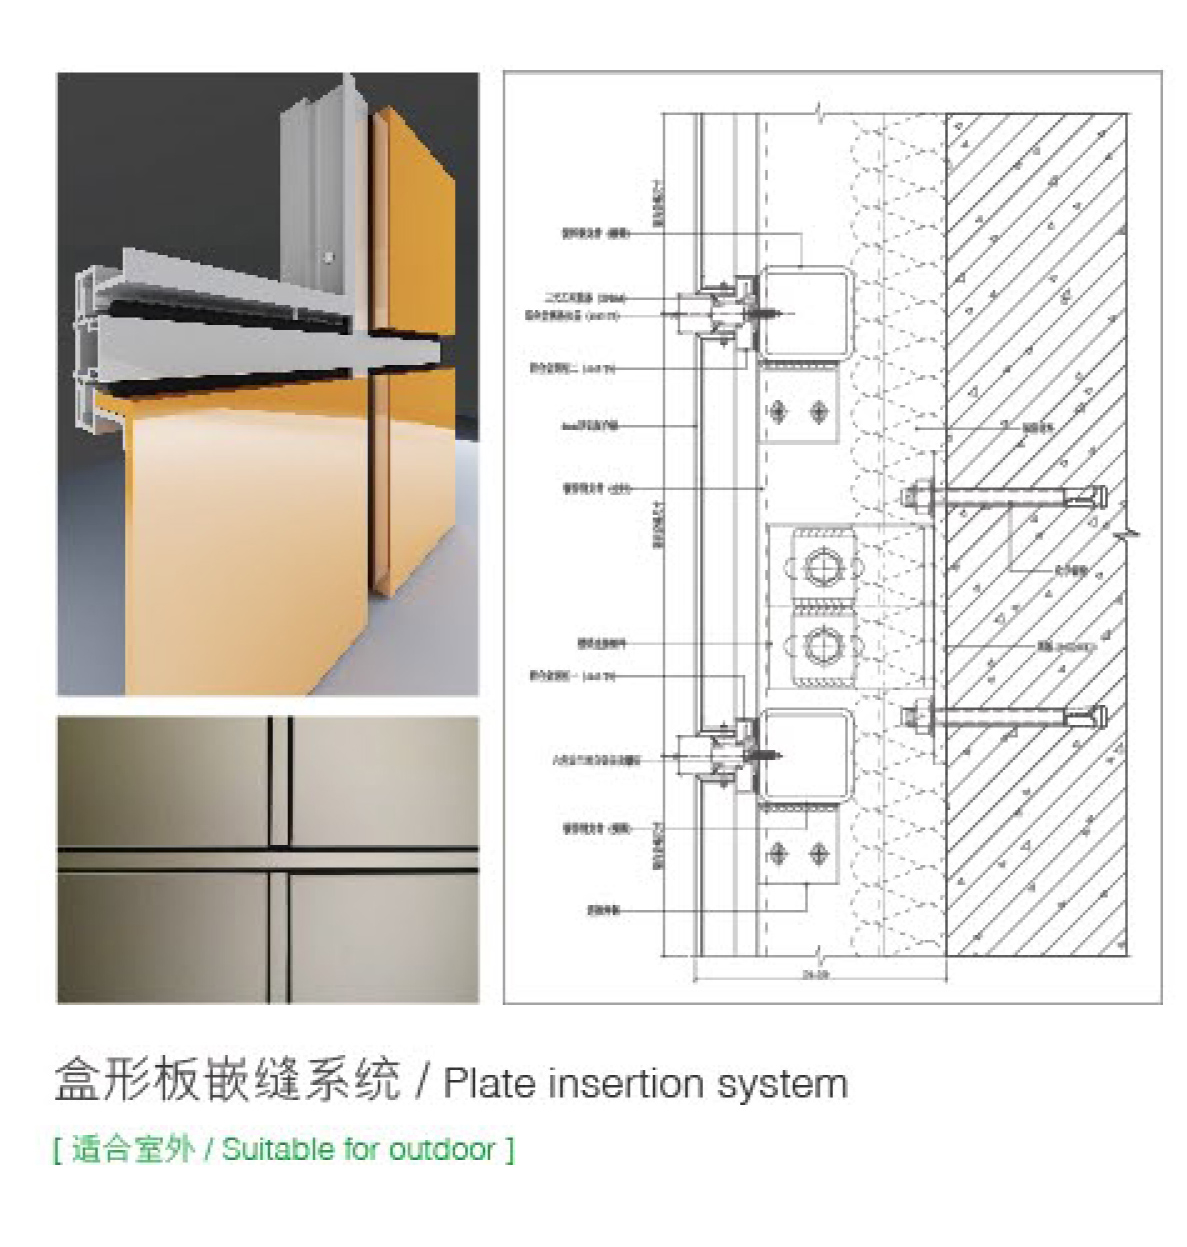 The box plate sealing system (suitable for outdoor)